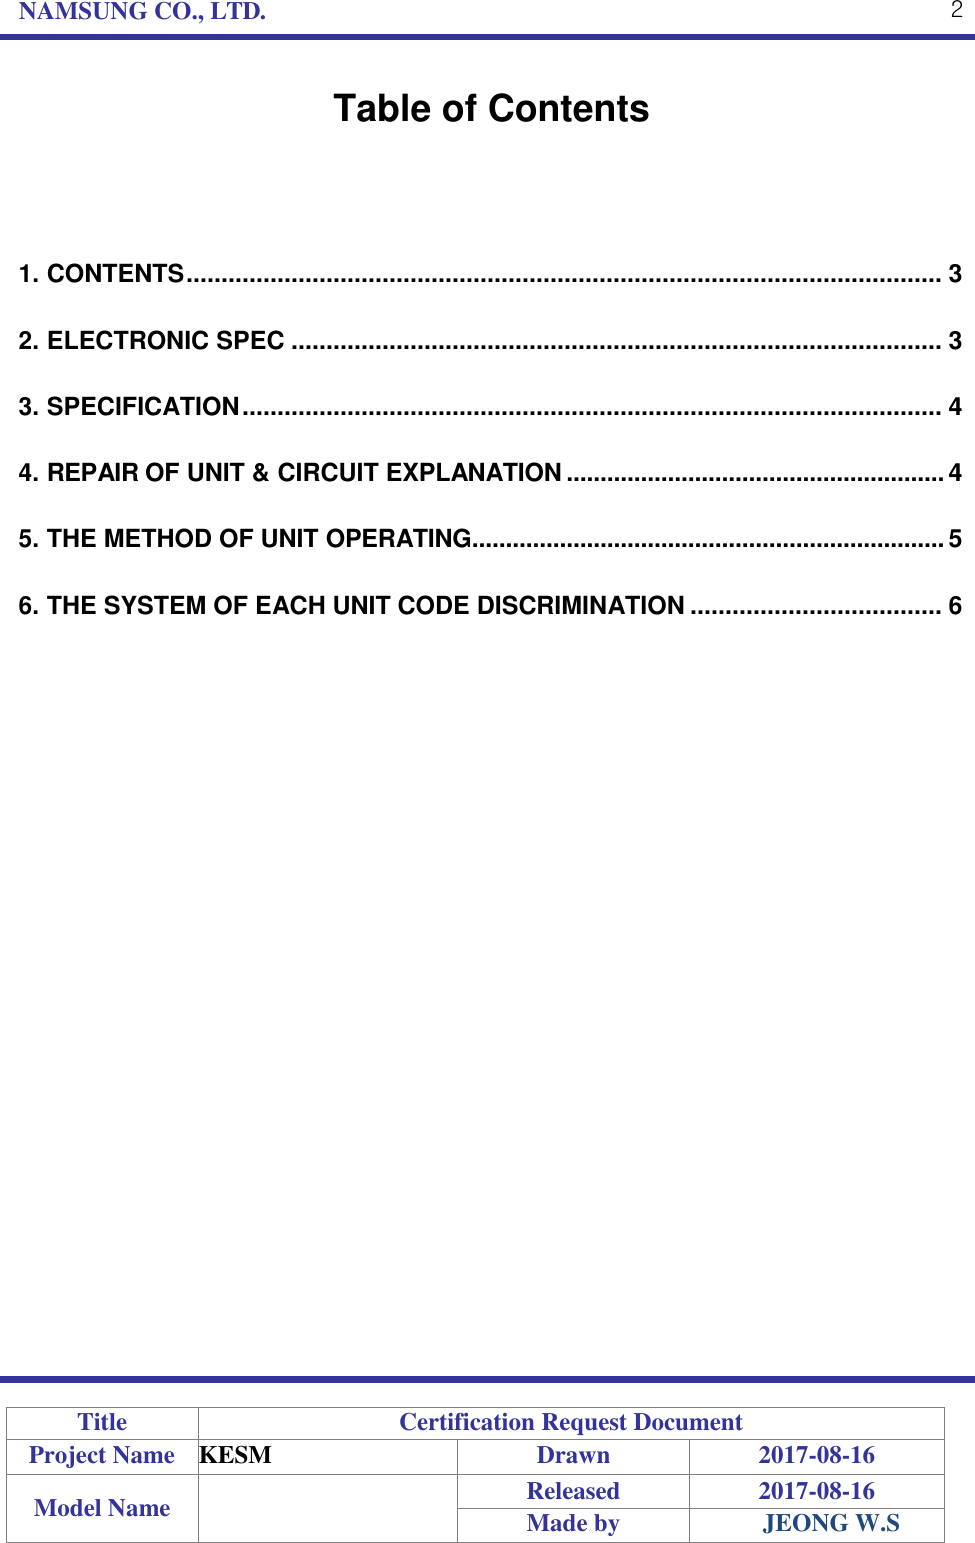 NAMSUNG CO., LTD. 2    Table of Contents    1. CONTENTS ............................................................................................................ 3 2. ELECTRONIC SPEC ............................................................................................. 3 3. SPECIFICATION .................................................................................................... 4 4. REPAIR OF UNIT &amp; CIRCUIT EXPLANATION ........................................................ 4 5. THE METHOD OF UNIT OPERATING ...................................................................... 5 6. THE SYSTEM OF EACH UNIT CODE DISCRIMINATION .................................... 6                                  Title Certification Request Document Project Name KESM Drawn 2017-08-16 Model Name  Released 2017-08-16 Made by JEONG W.S 